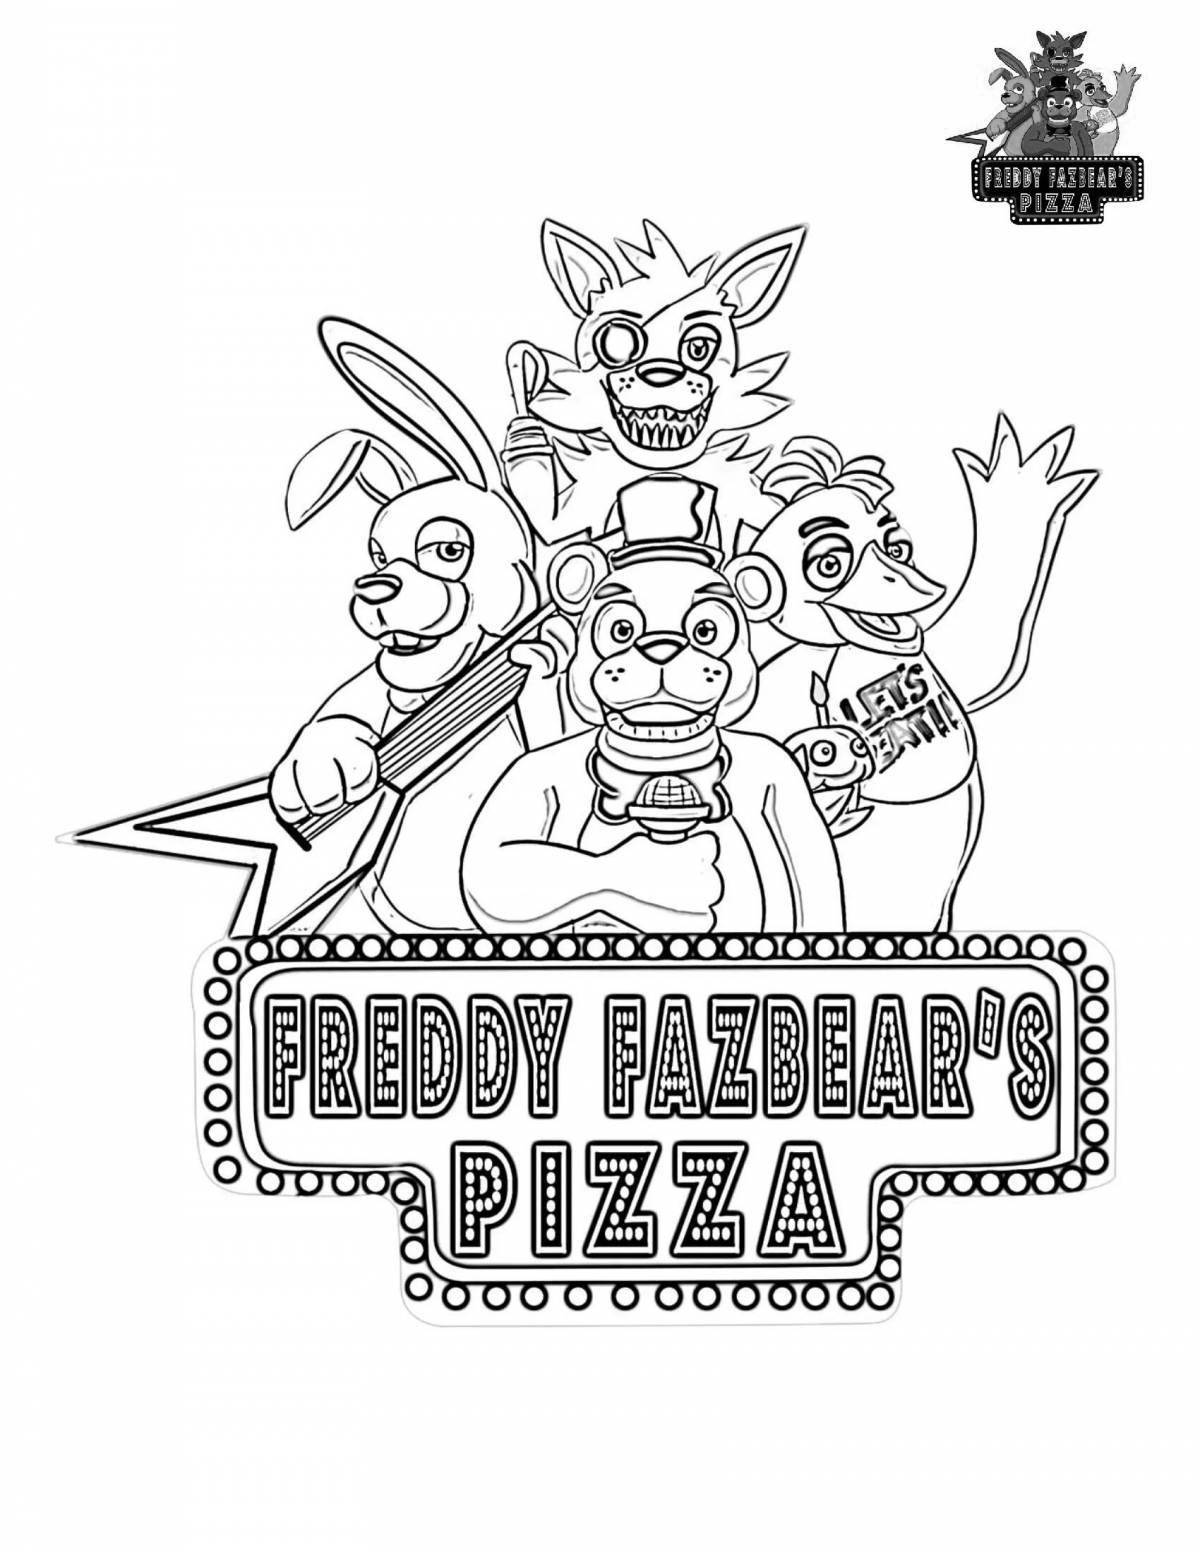 Festive Five Nights at Freddy's Coloring Page